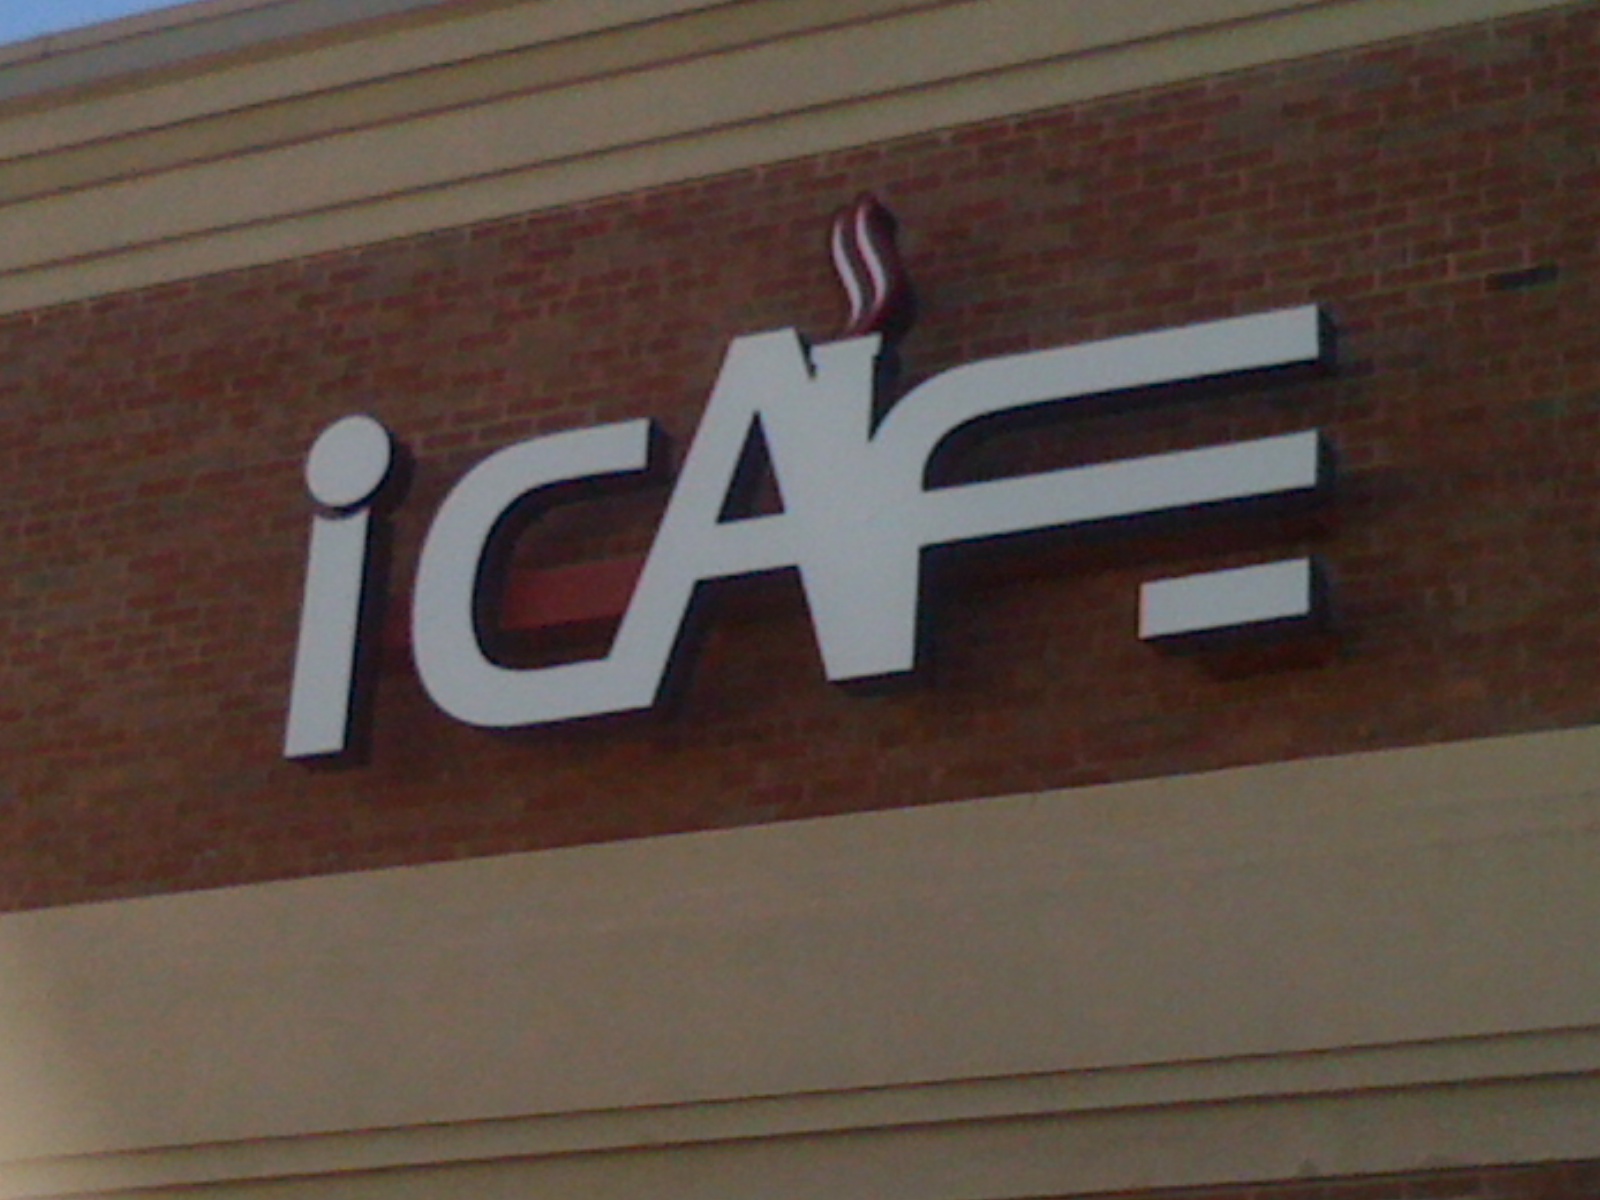 iCafe – Channel Letters